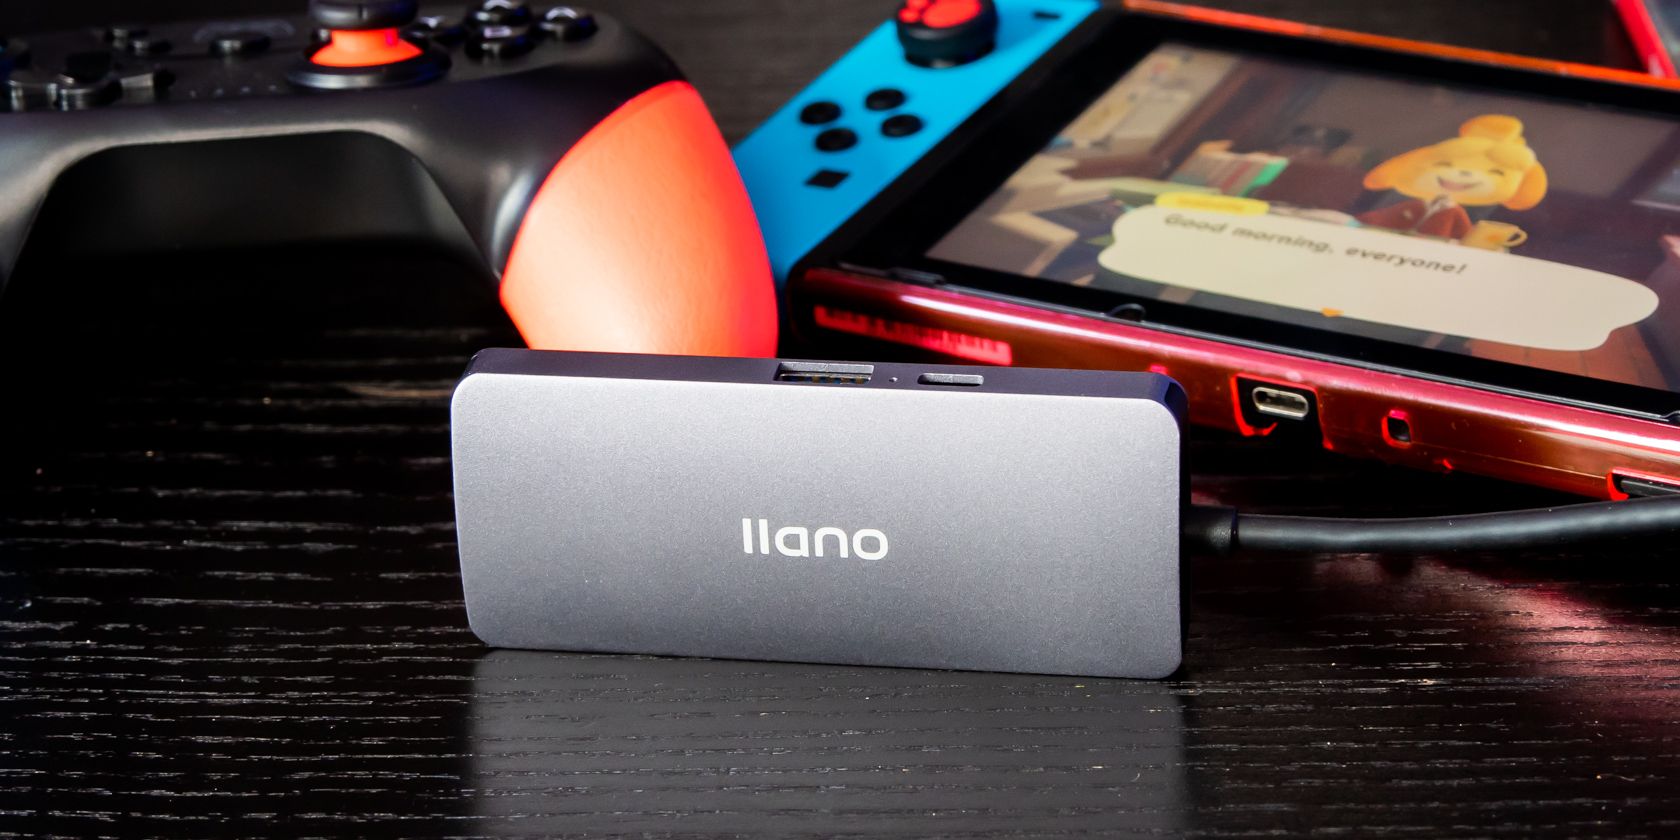 llano microsodkc for nintendo switch sitting next to console